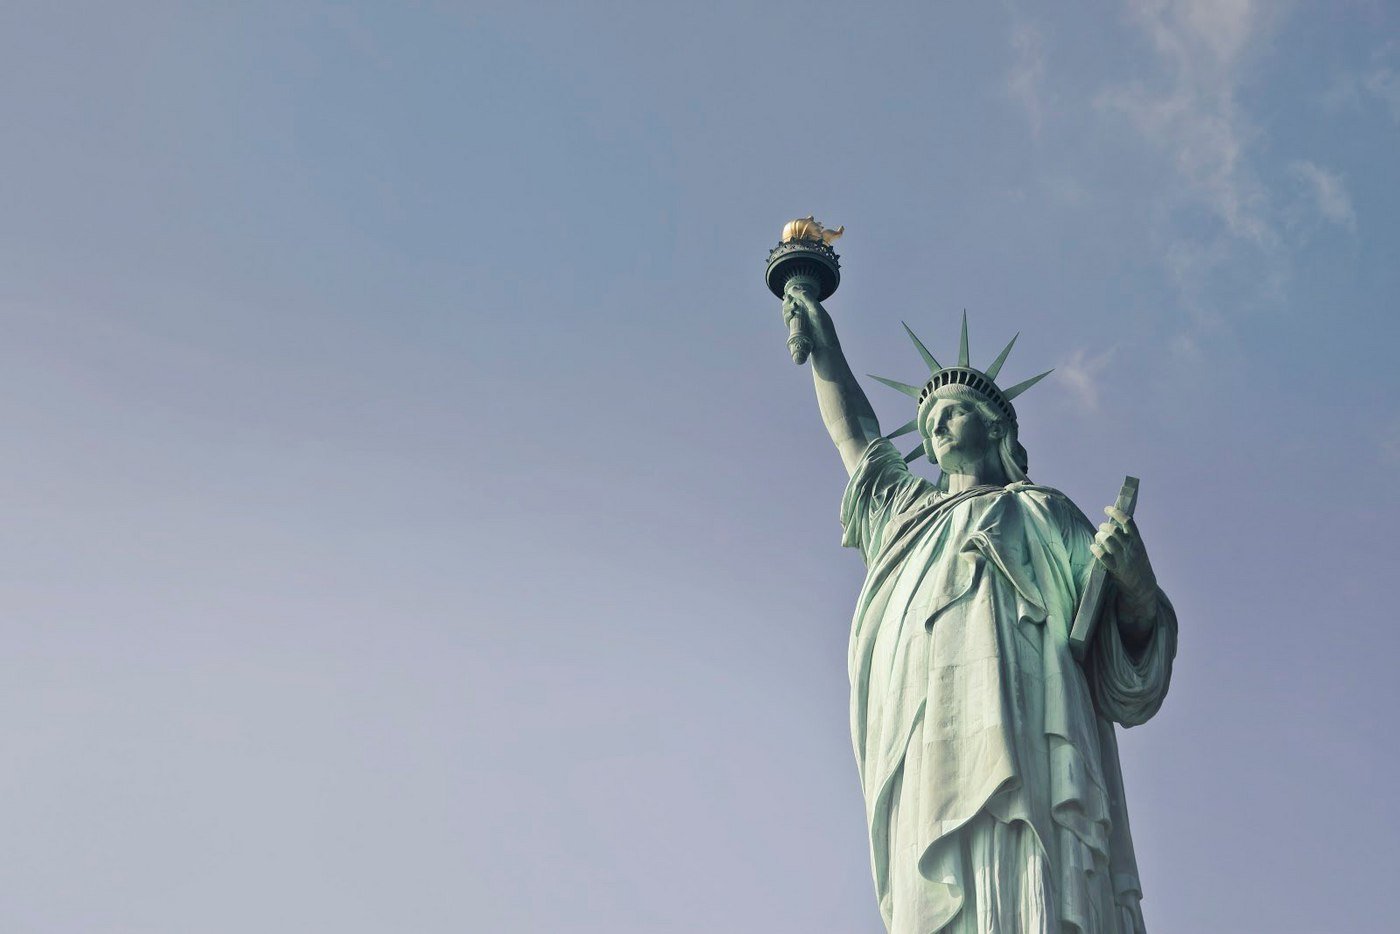 The Statue Of Liberty is the most famous example of copper that has gone through the patina process.